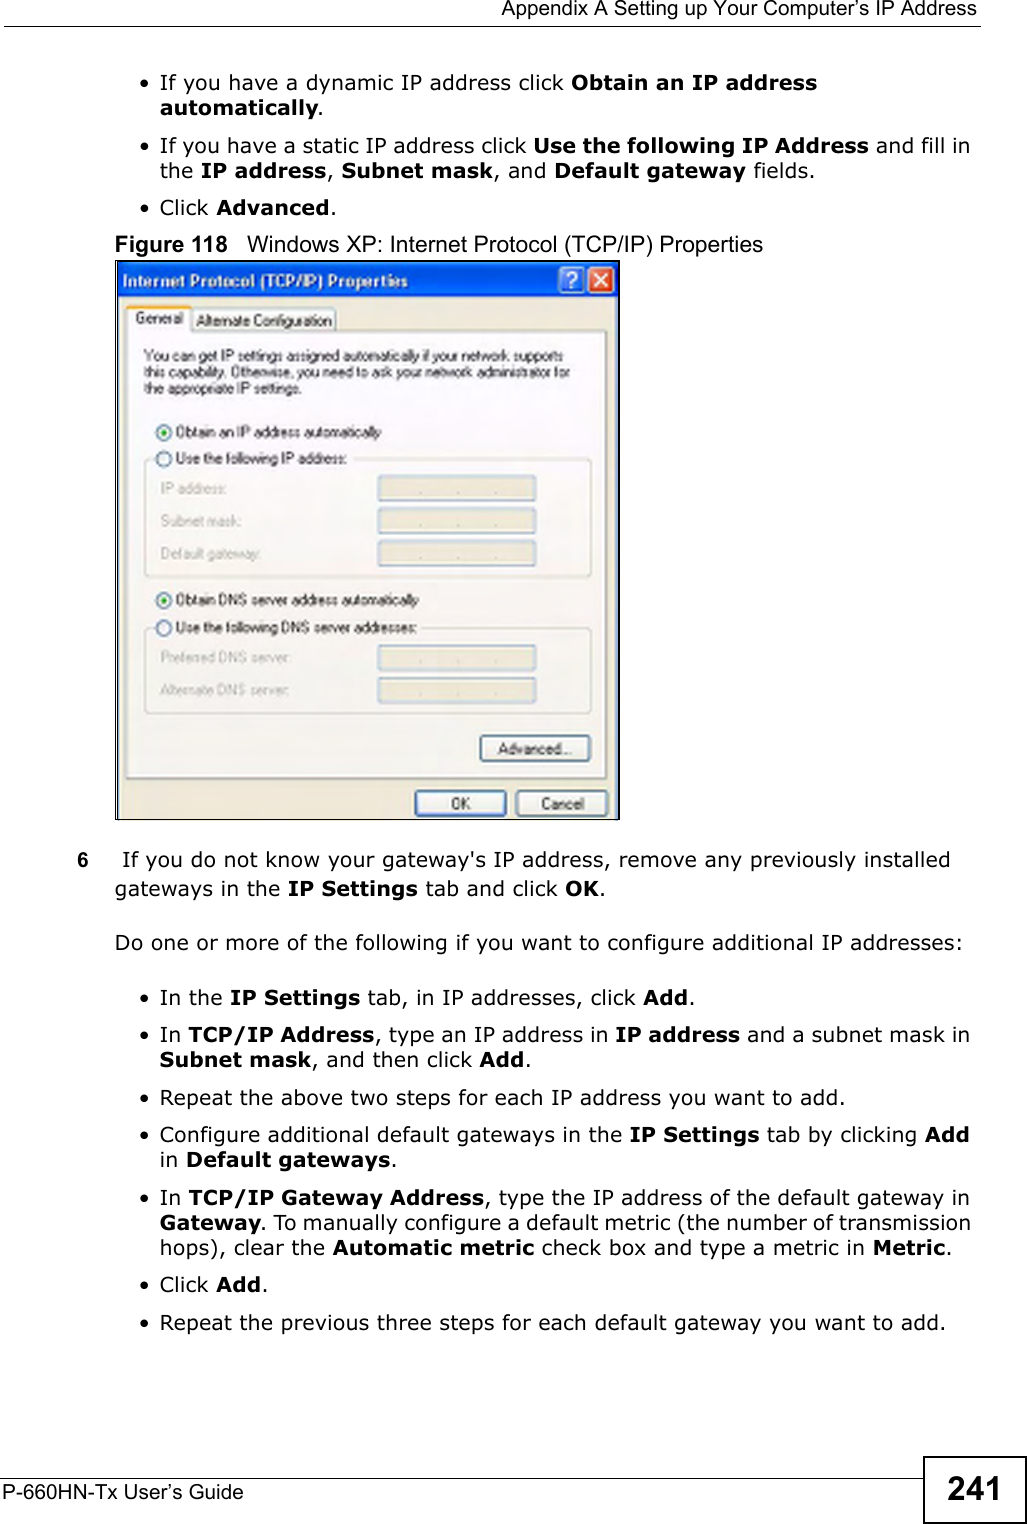  Appendix A Setting up Your Computer’s IP AddressP-660HN-Tx User’s Guide 241•If you have a dynamic IP address click Obtain an IP address automatically.• If you have a static IP address click Use the following IP Address and fill in the IP address, Subnet mask, and Default gateway fields. •Click Advanced.Figure 118   Windows XP: Internet Protocol (TCP/IP) Properties6 If you do not know your gateway&apos;s IP address, remove any previously installed gateways in the IP Settings tab and click OK.Do one or more of the following if you want to configure additional IP addresses:•In the IP Settings tab, in IP addresses, click Add.•In TCP/IP Address, type an IP address in IP address and a subnet mask in Subnet mask, and then click Add.• Repeat the above two steps for each IP address you want to add.• Configure additional default gateways in the IP Settings tab by clicking Add in Default gateways.•In TCP/IP Gateway Address, type the IP address of the default gateway in Gateway. To manually configure a default metric (the number of transmission hops), clear the Automatic metric check box and type a metric in Metric.•Click Add. • Repeat the previous three steps for each default gateway you want to add.